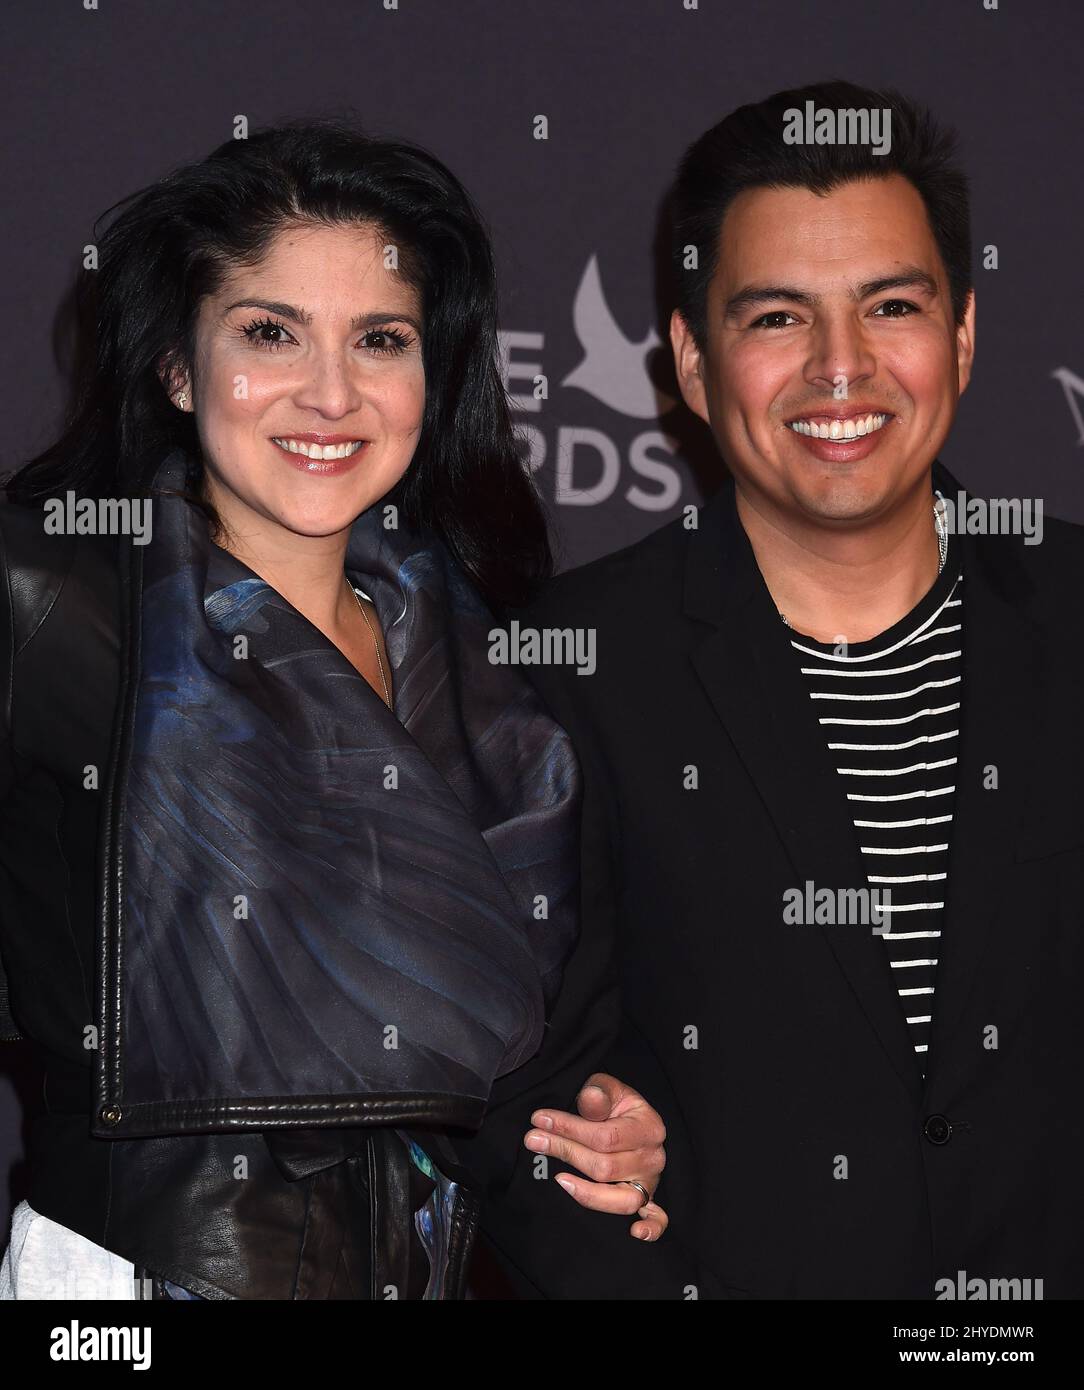 Jaci Velasquez and Nick Gonzales attending at the 48th Annual GMA Dove Awards held at the Lipscomb University's Allen Arena in Los Angeles, USA Stock Photo